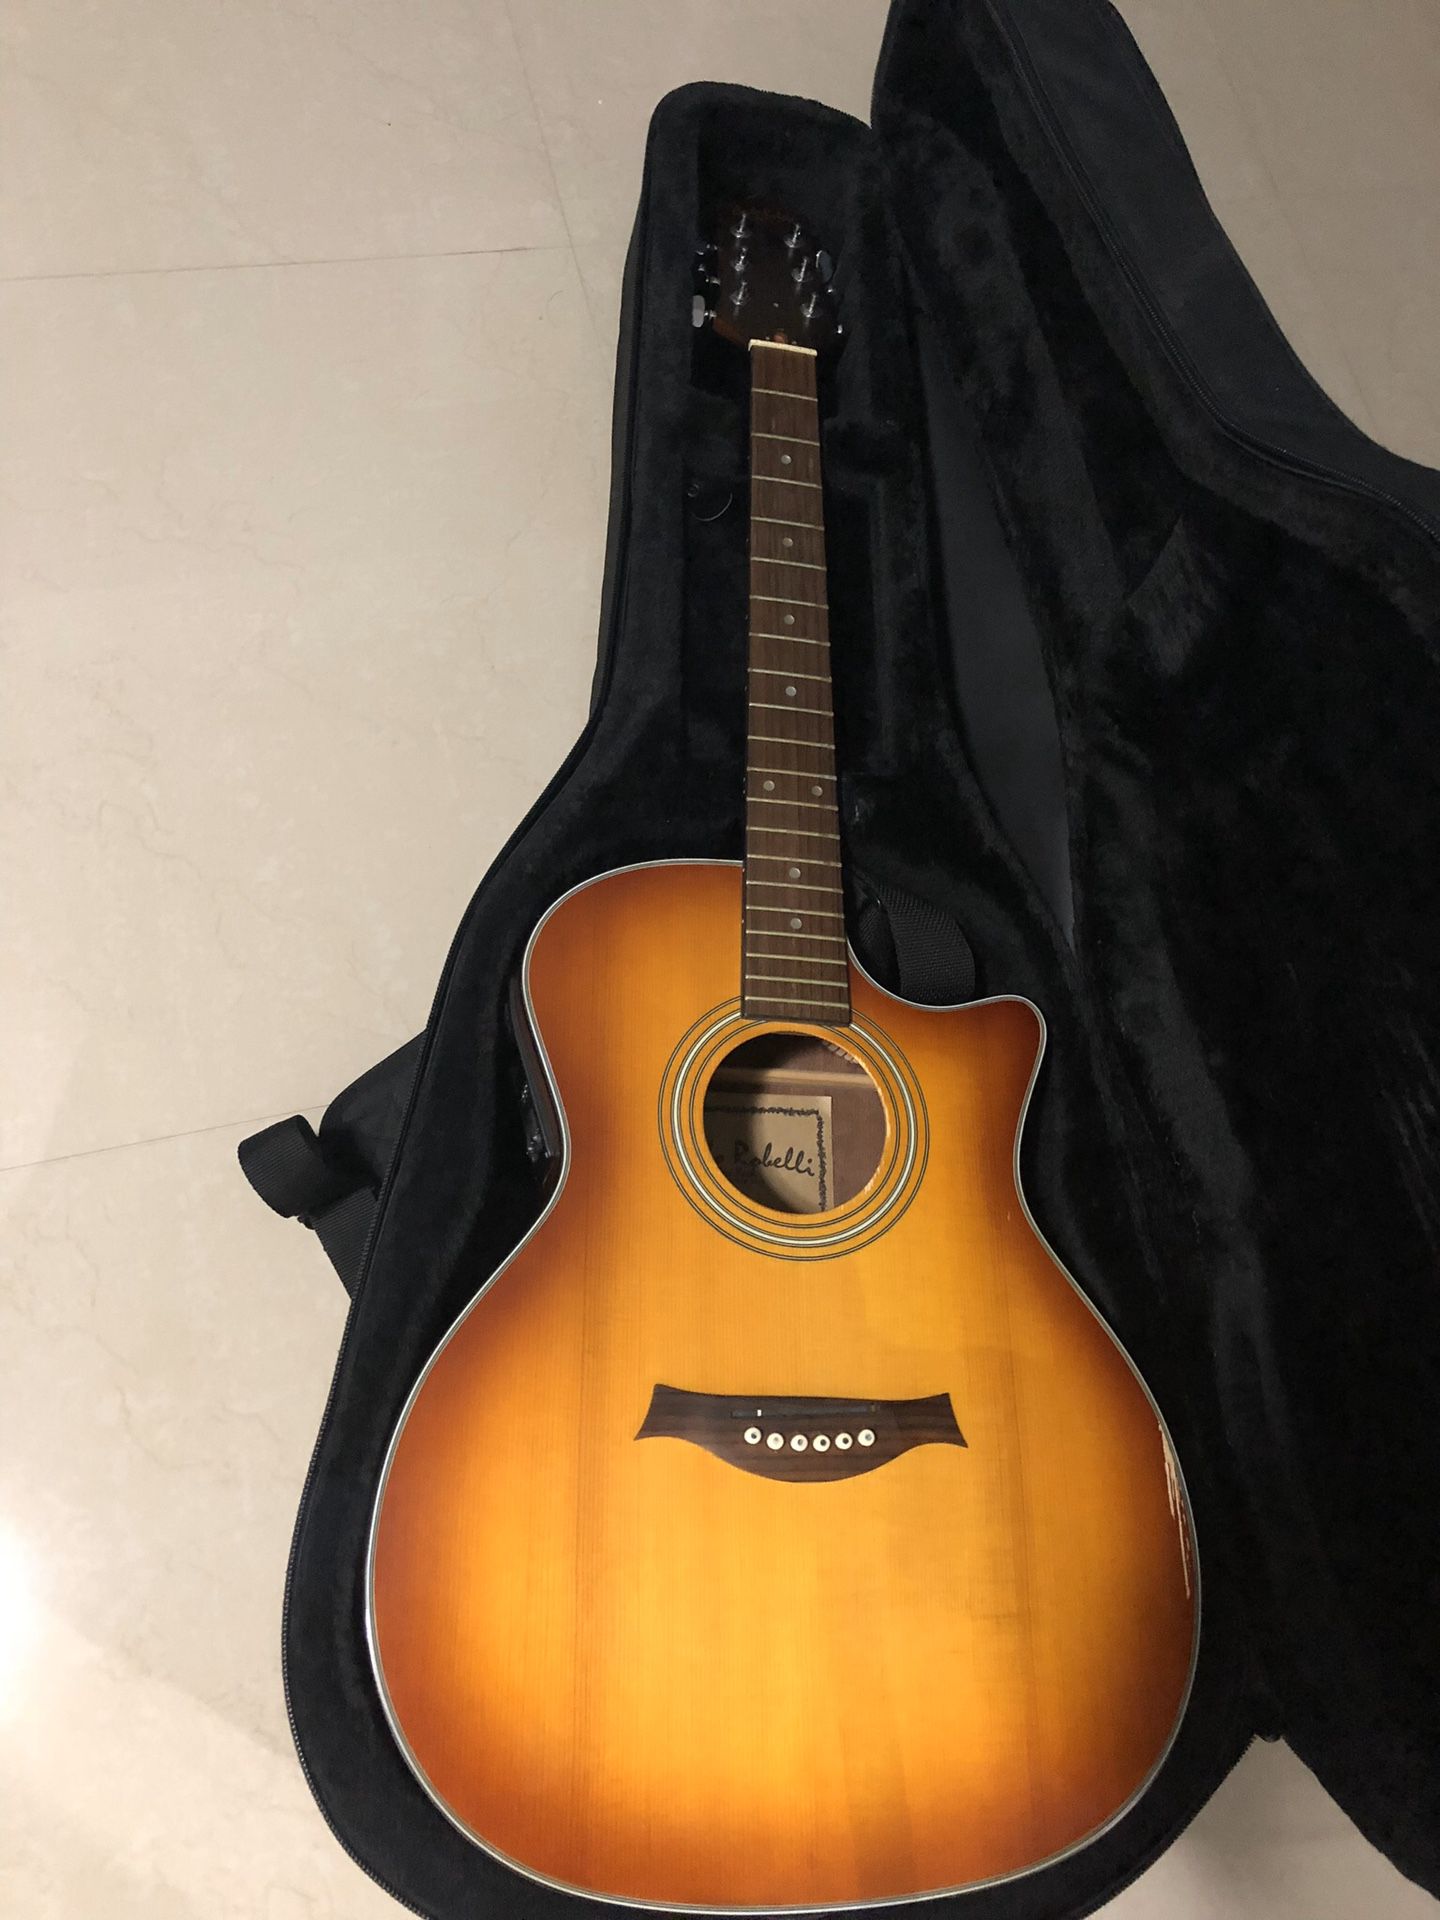 Carlo Robelli Acoustic Electric Guitar with case